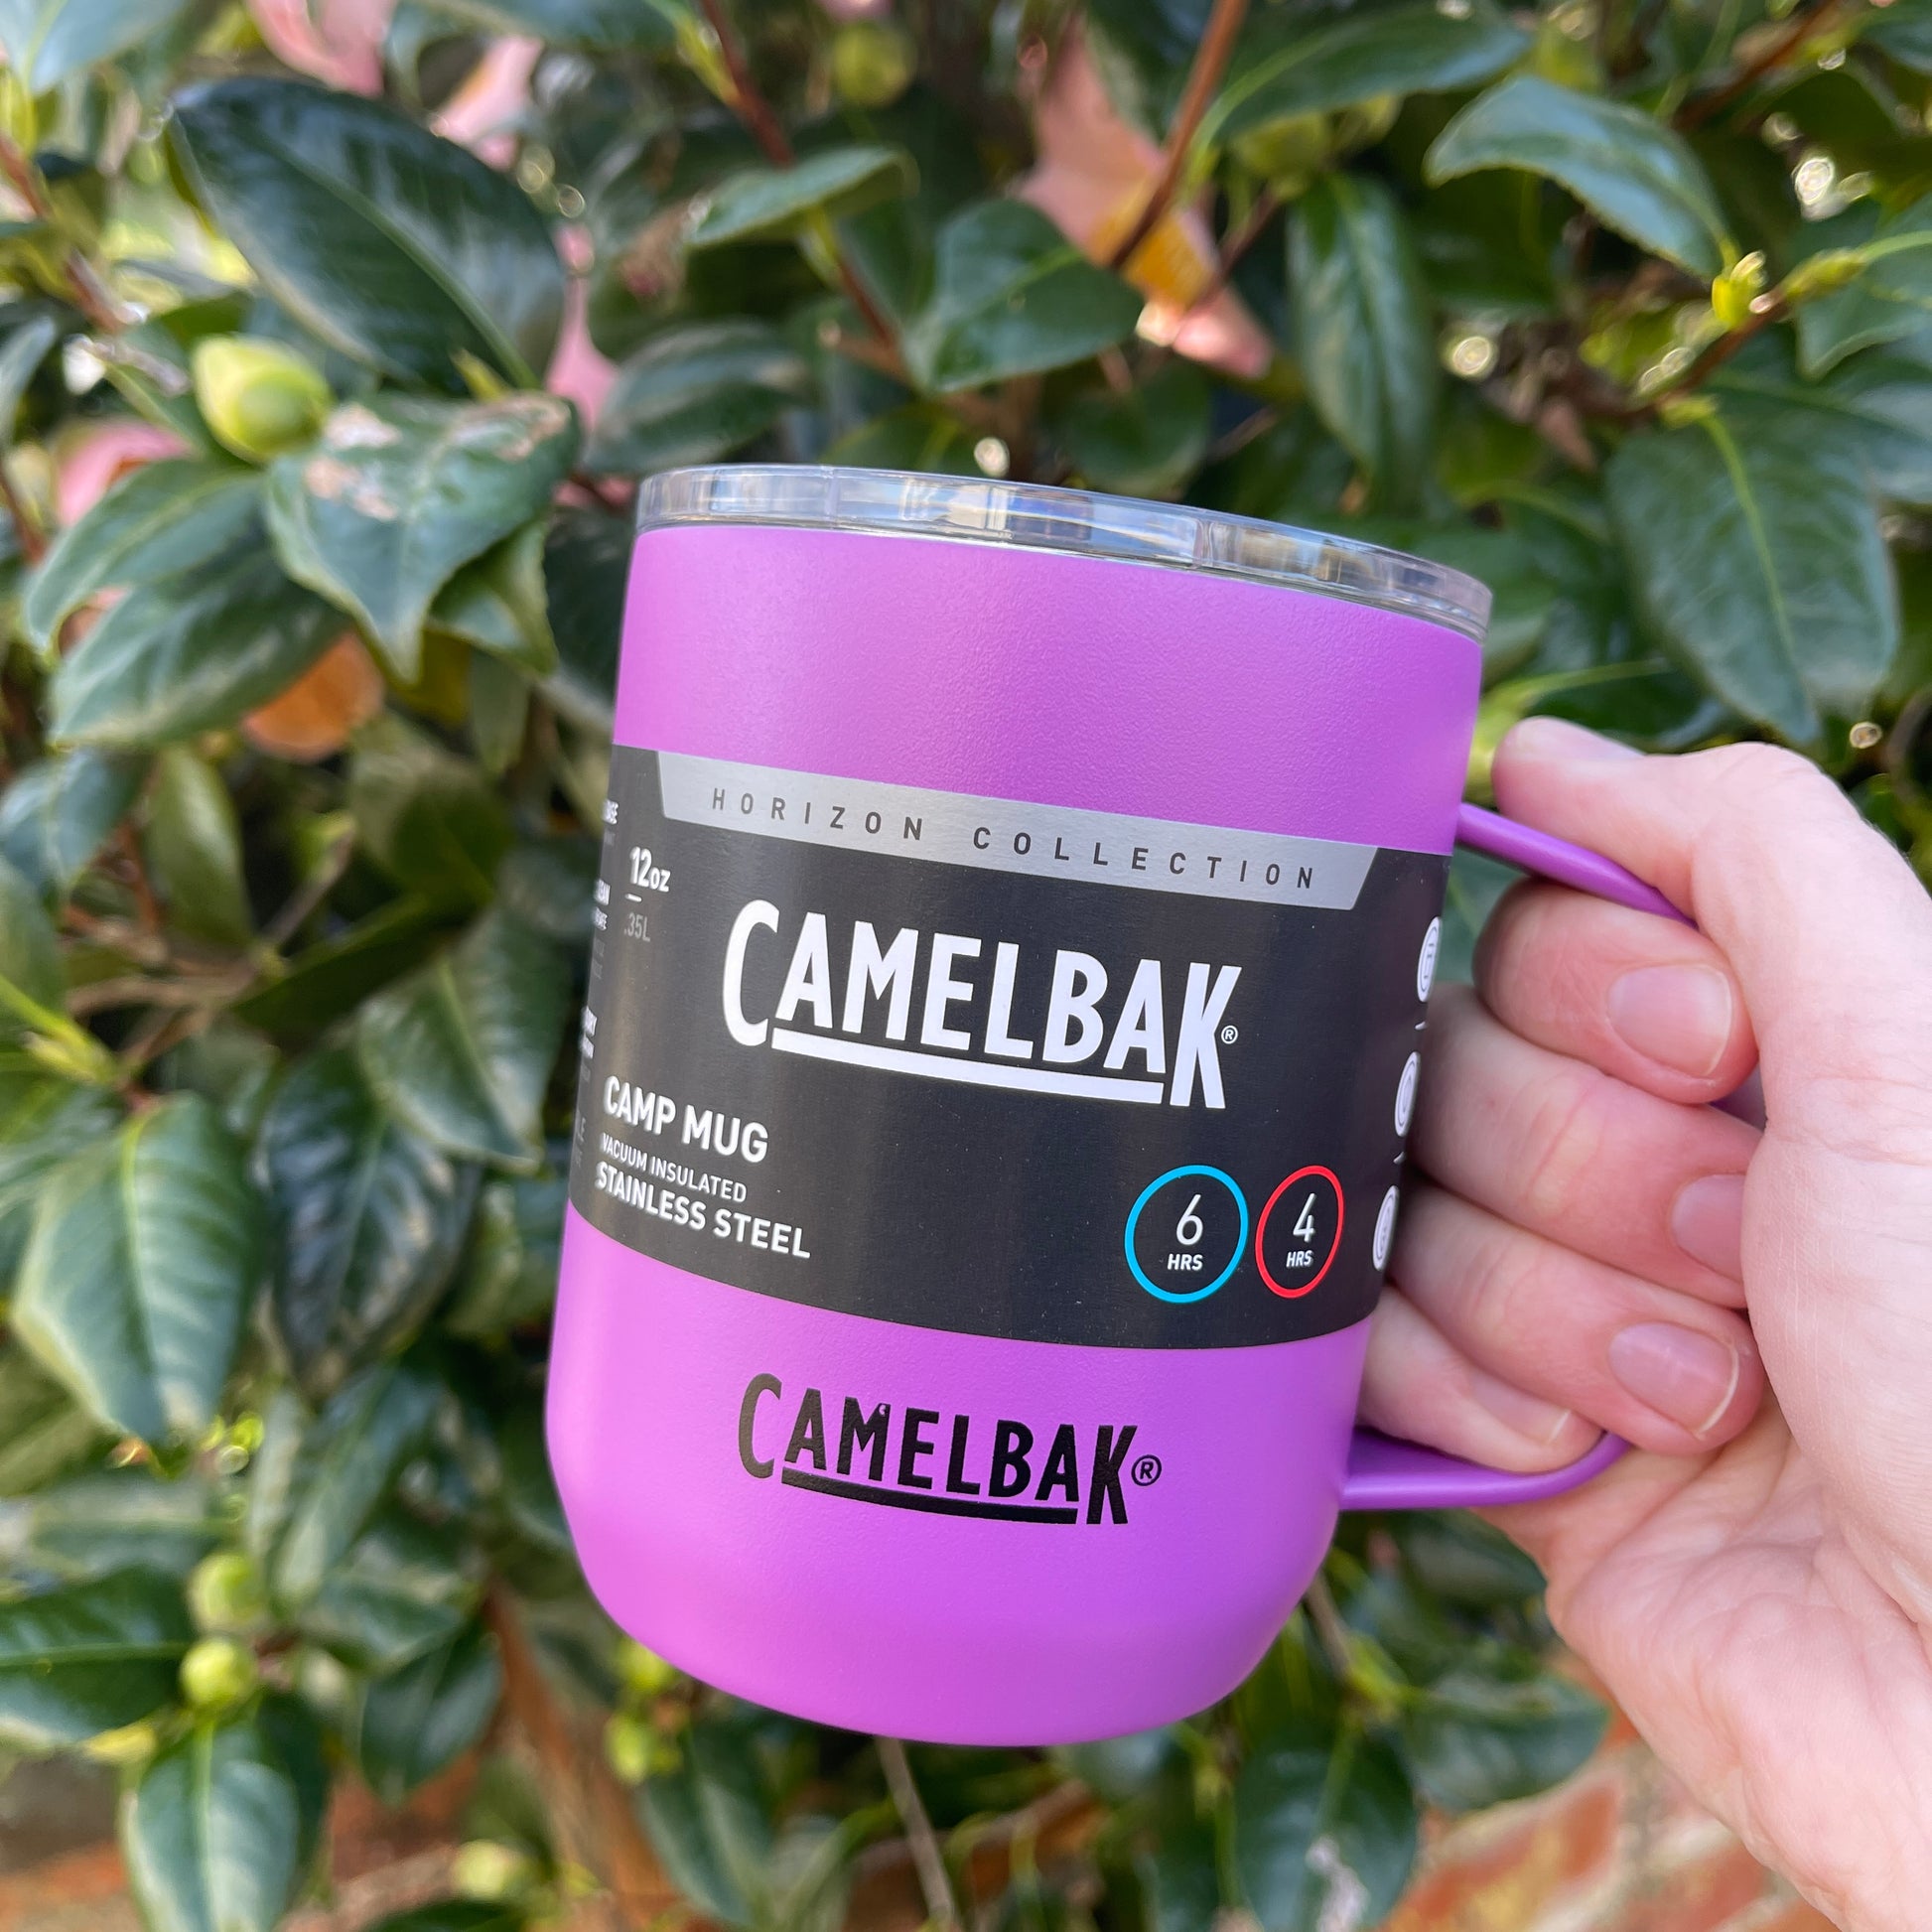 Camelbak magenta pink stainless camping mug with lid and handle.